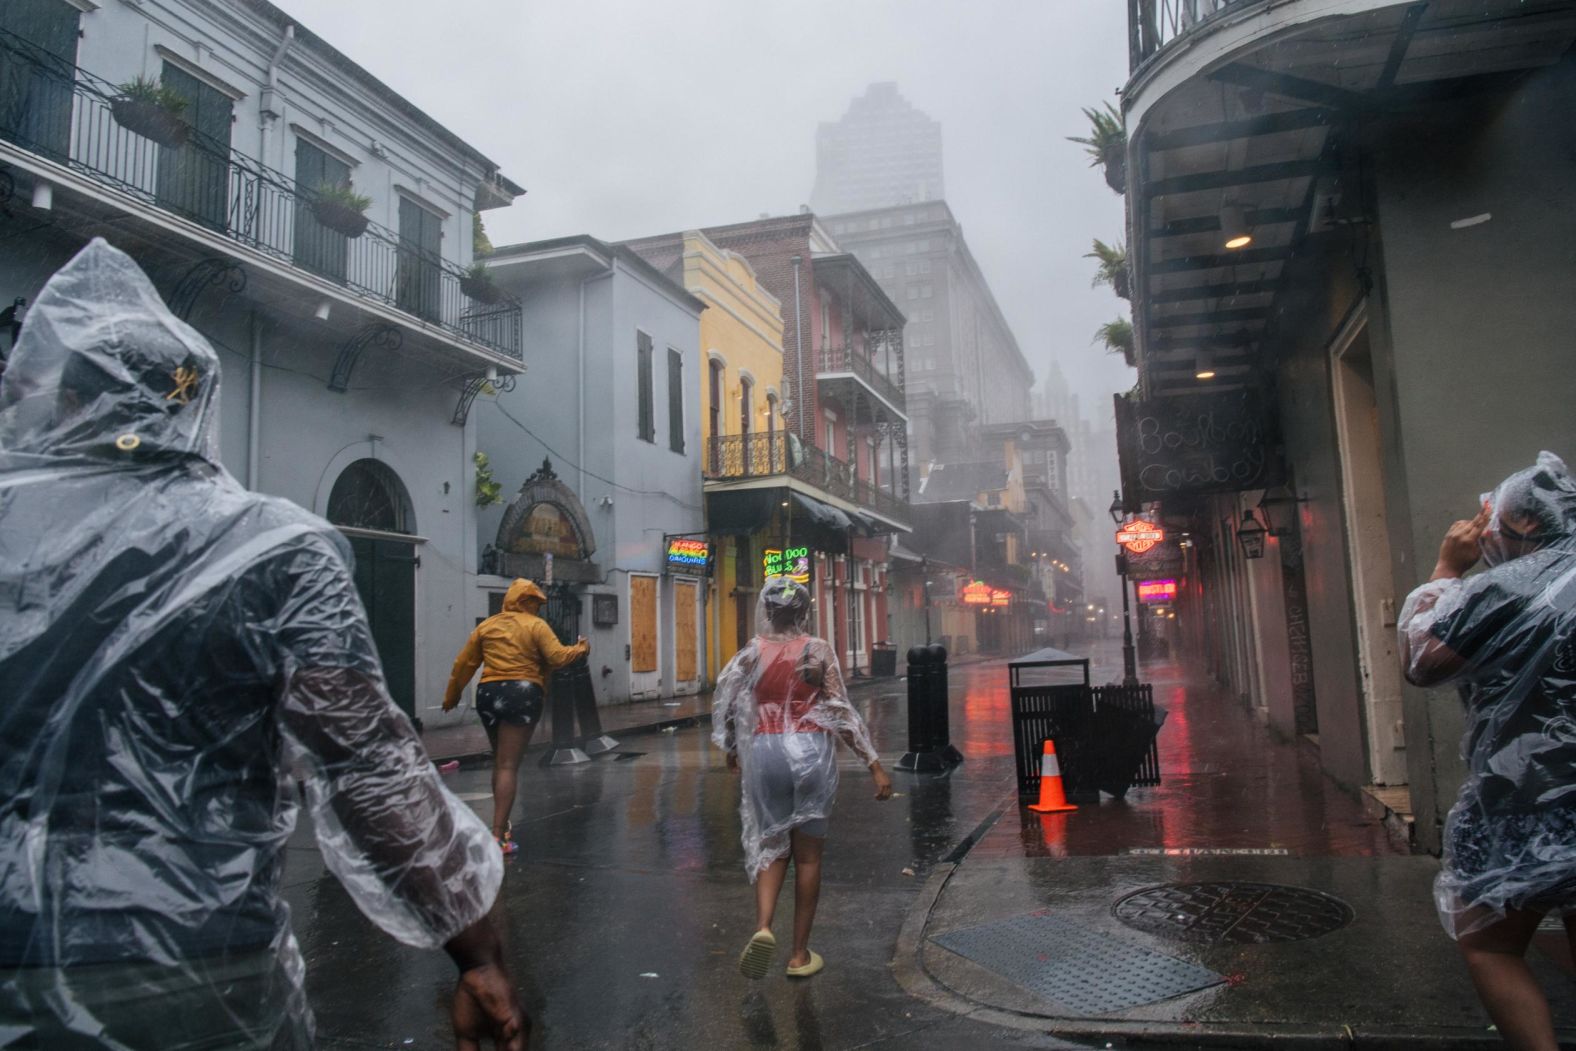 People walk through the French Quarter in New Orleans on August 29.